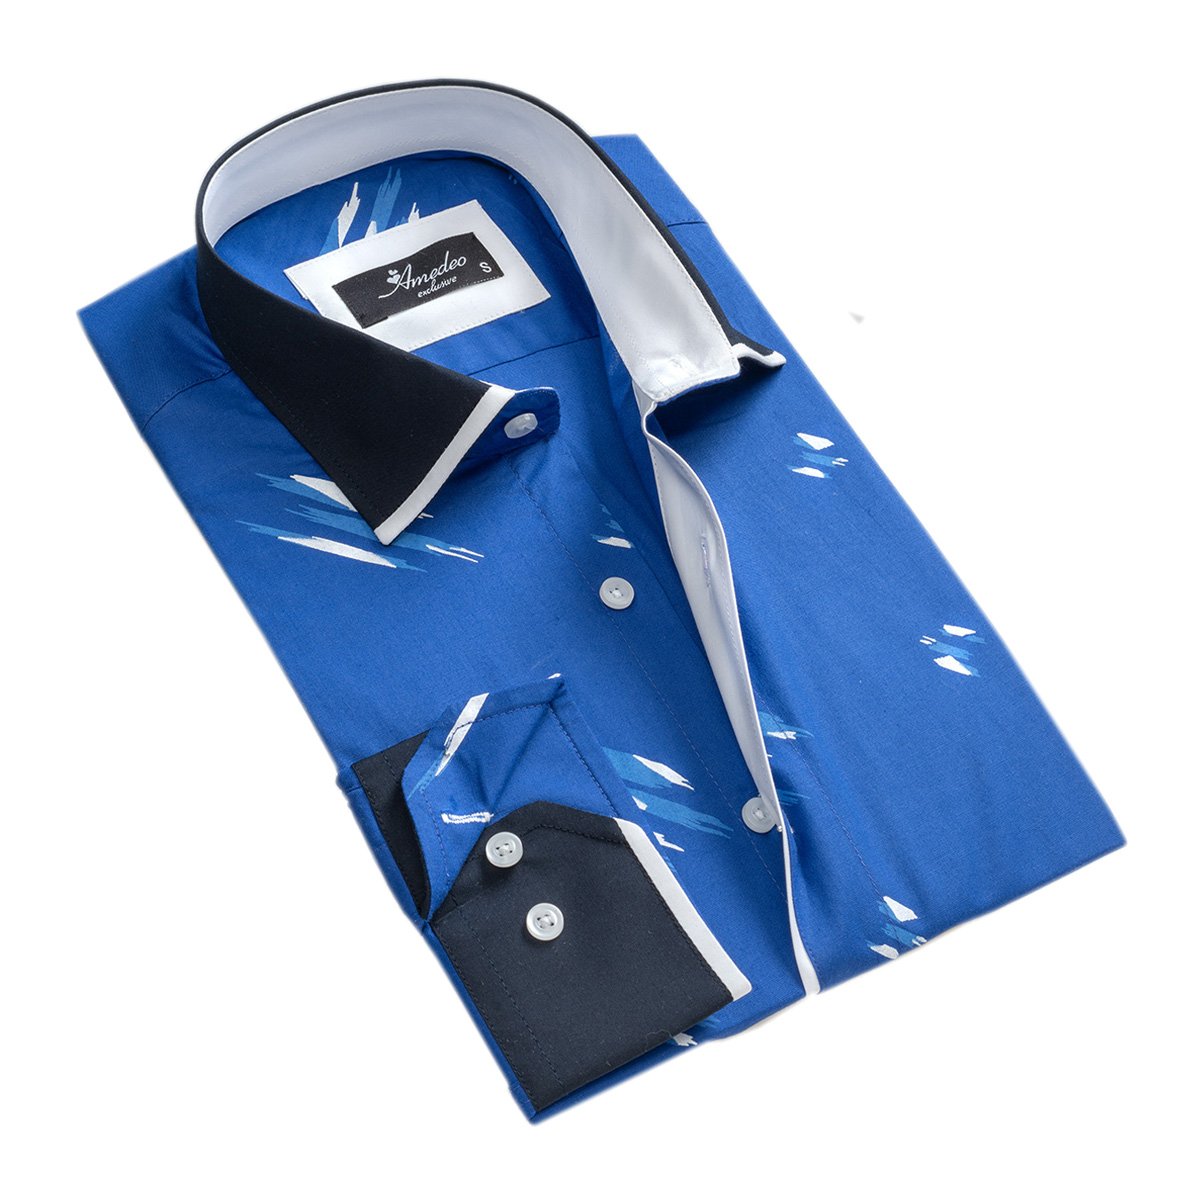 Medium Blue Accents Mens Slim Fit Designer Dress Shirt - tailored Cotton Shirts for Work and Casual Wear - Amedeo Exclusive